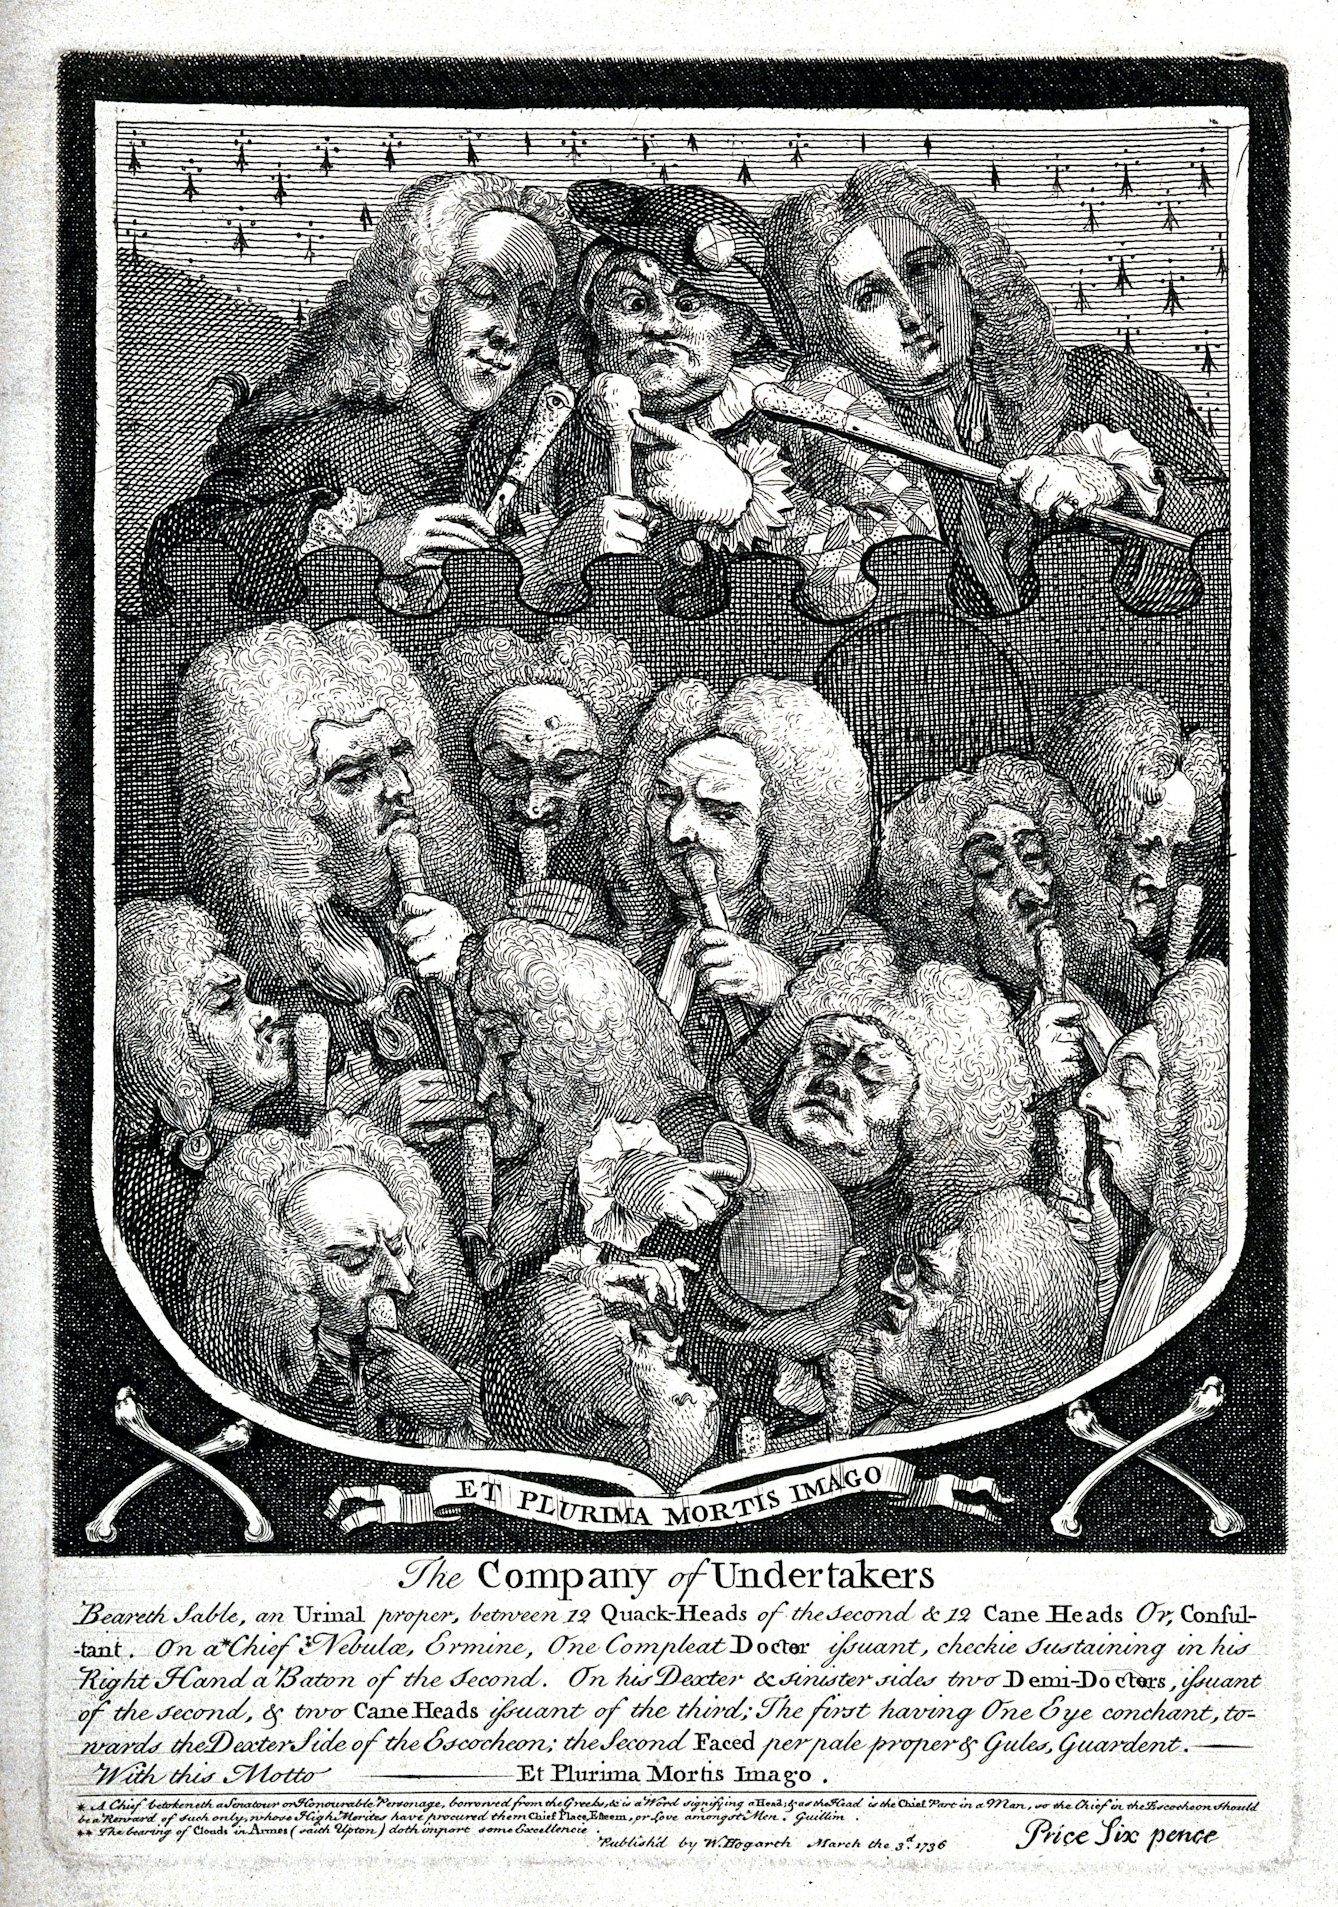 A caricature of various doctors and sellers of medicine, labelled as "The Company of Undertakers".